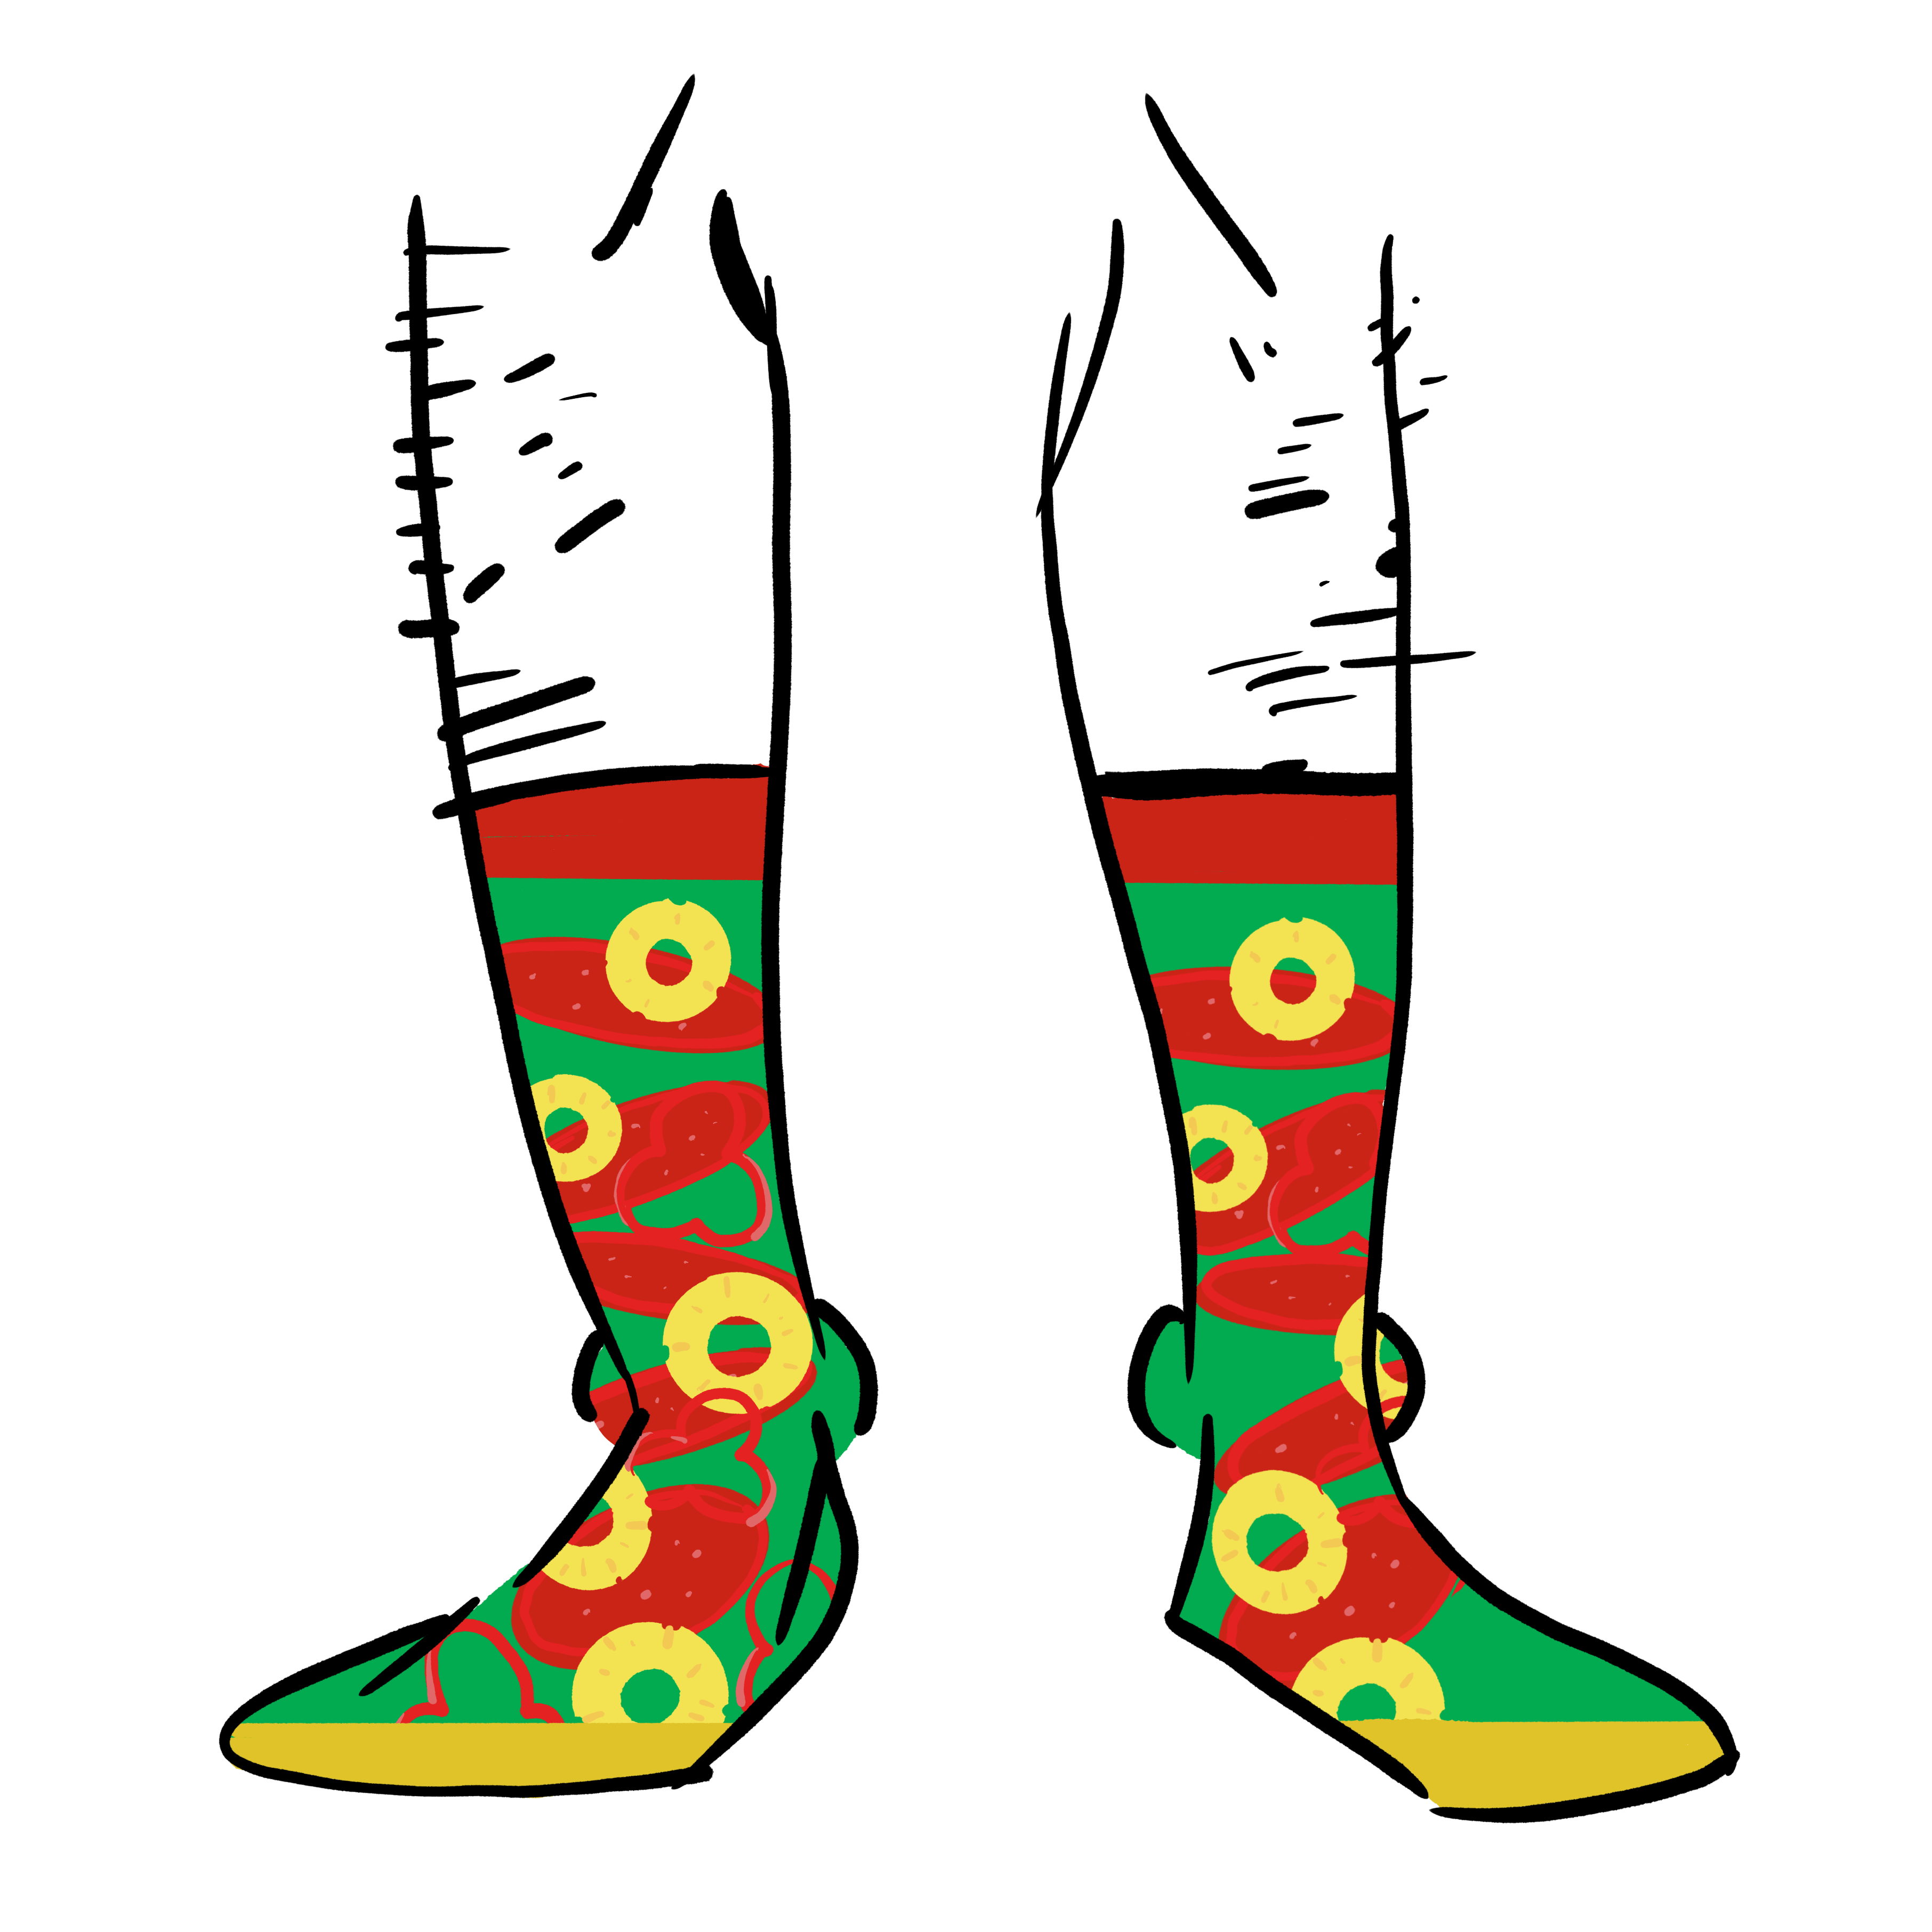 Socks with pepperoni, pineapple rings, and bell peppers on them. The socks are green.